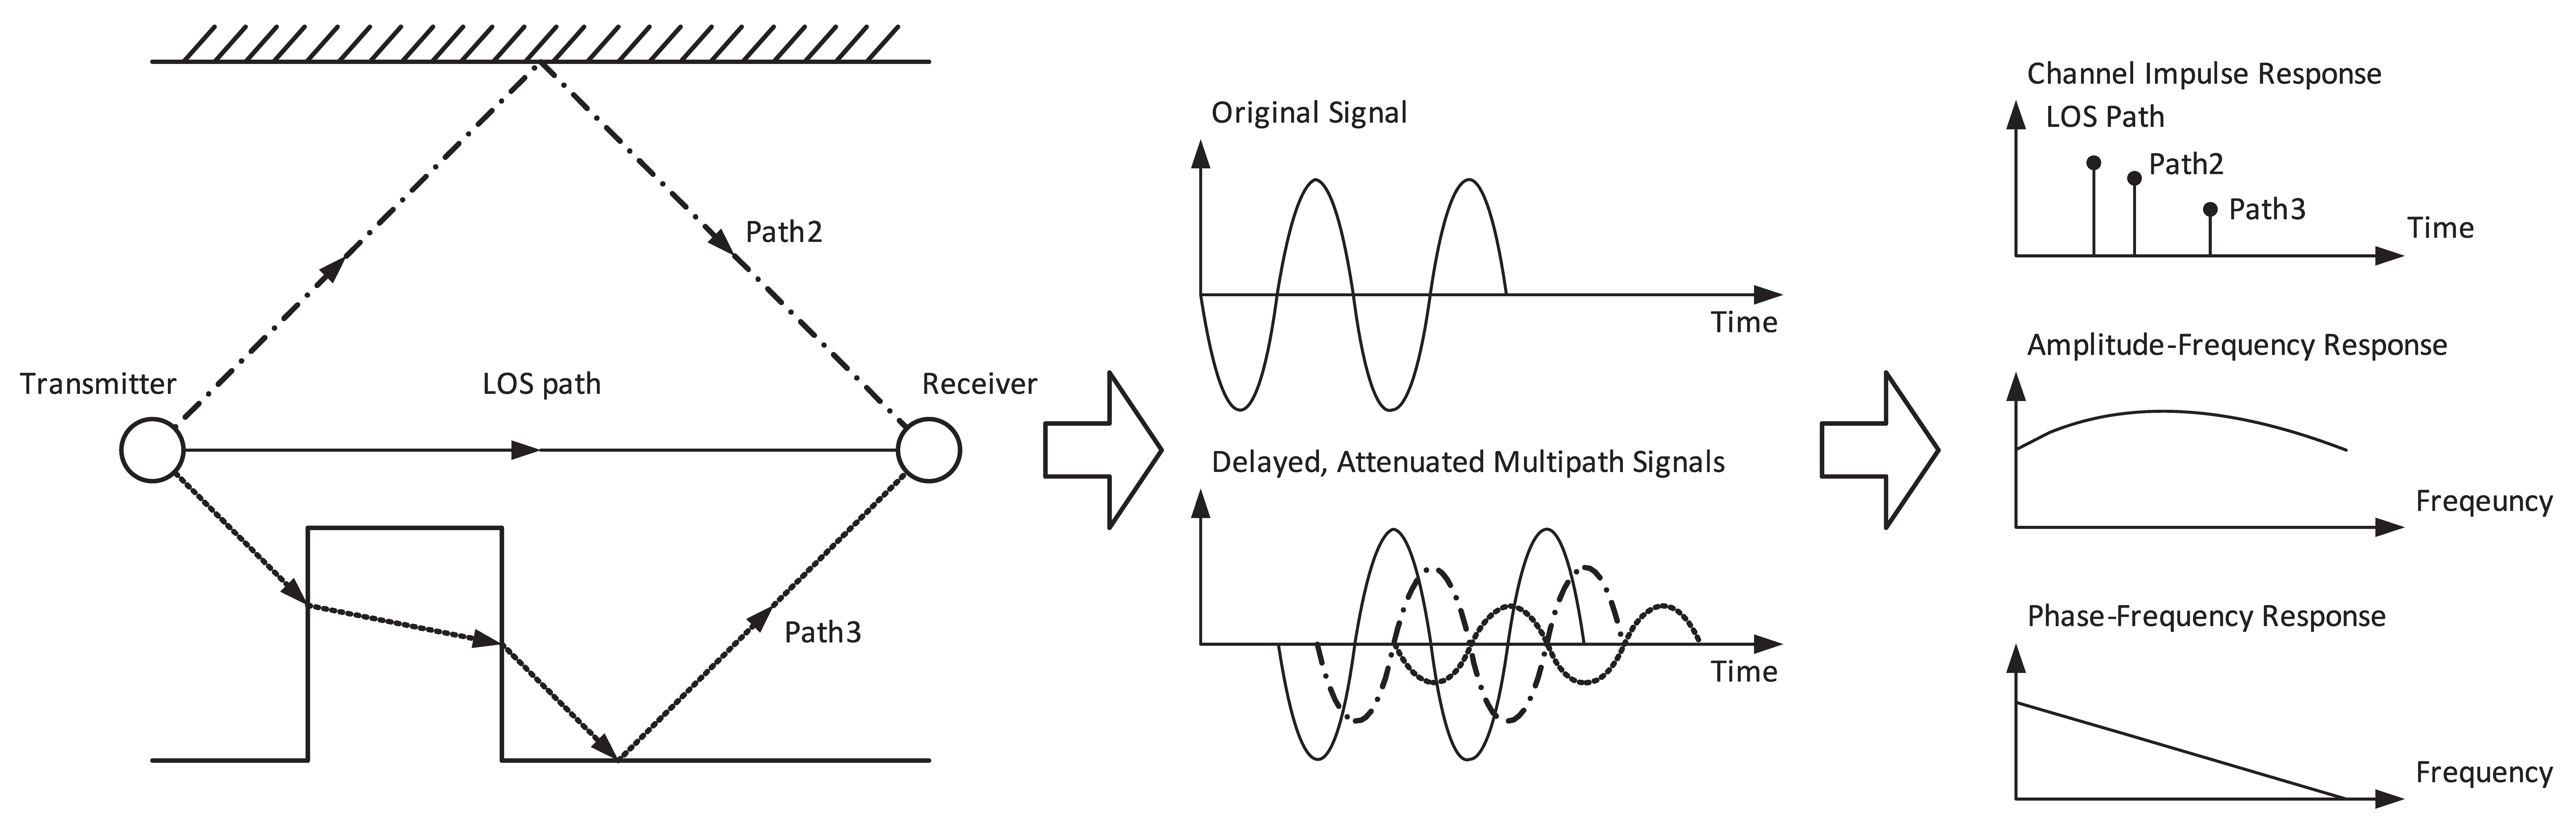 Multipath propagations, received signals, and channel responses.